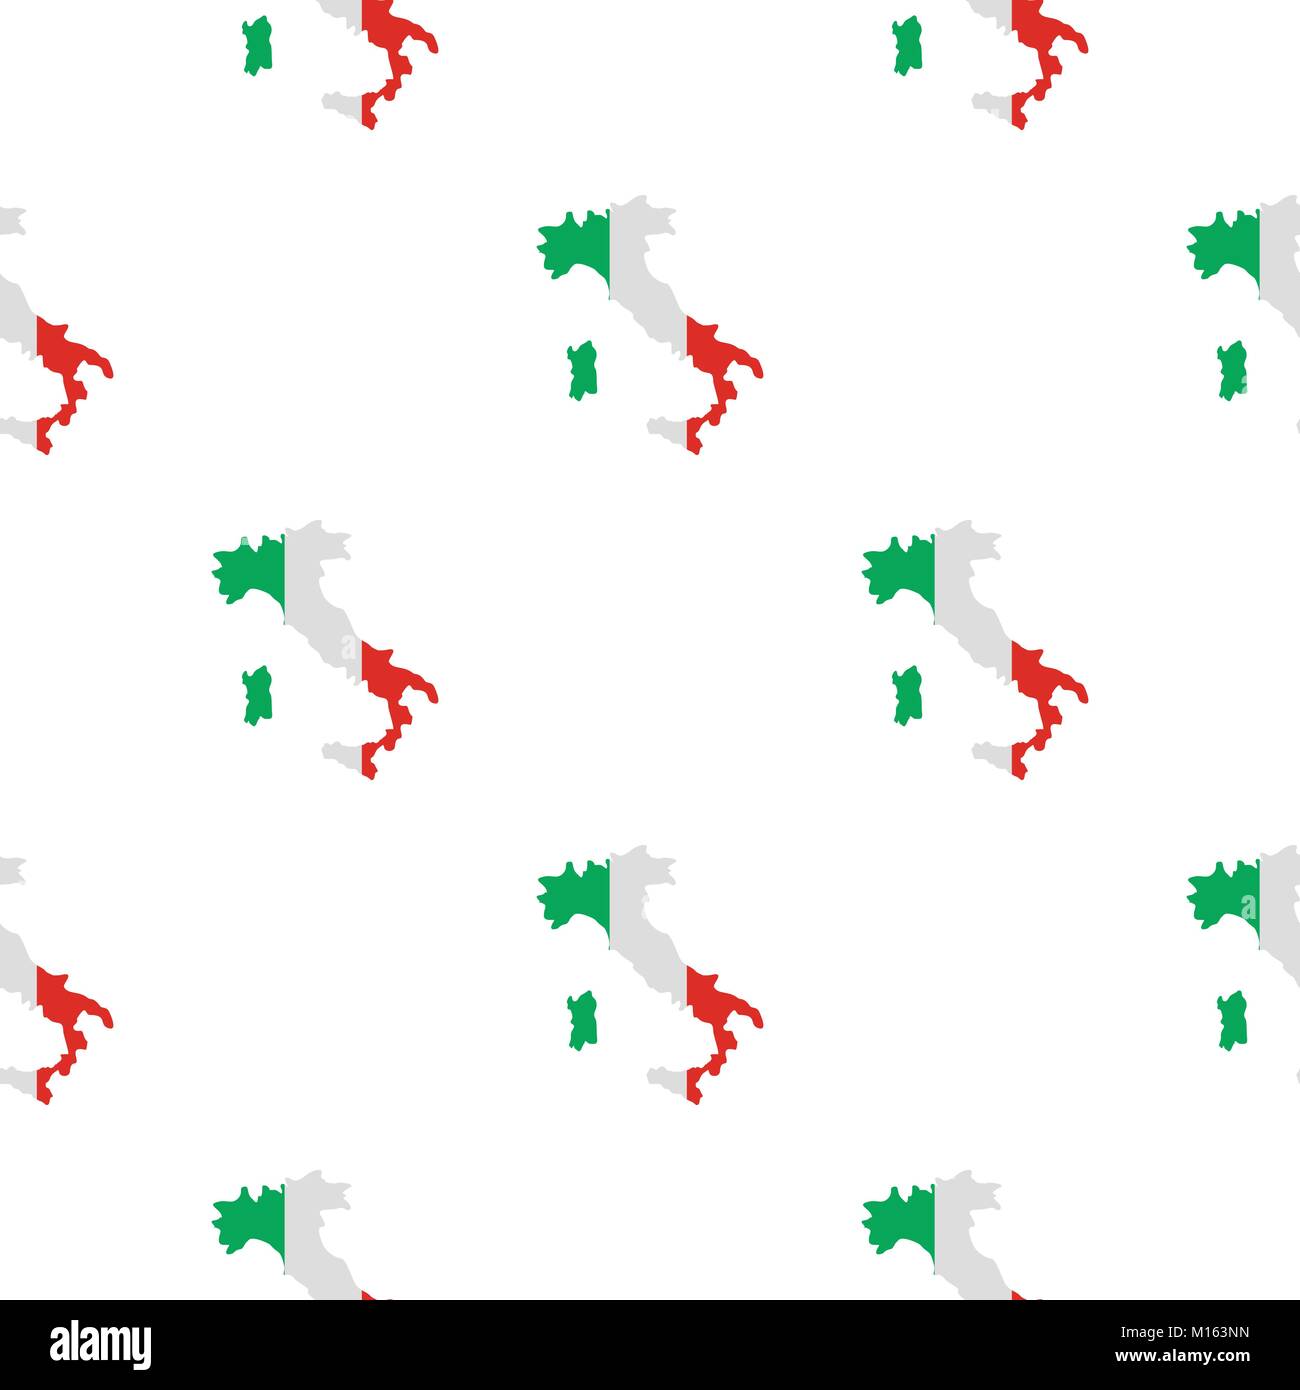 Italy map pattern flat Stock Vector